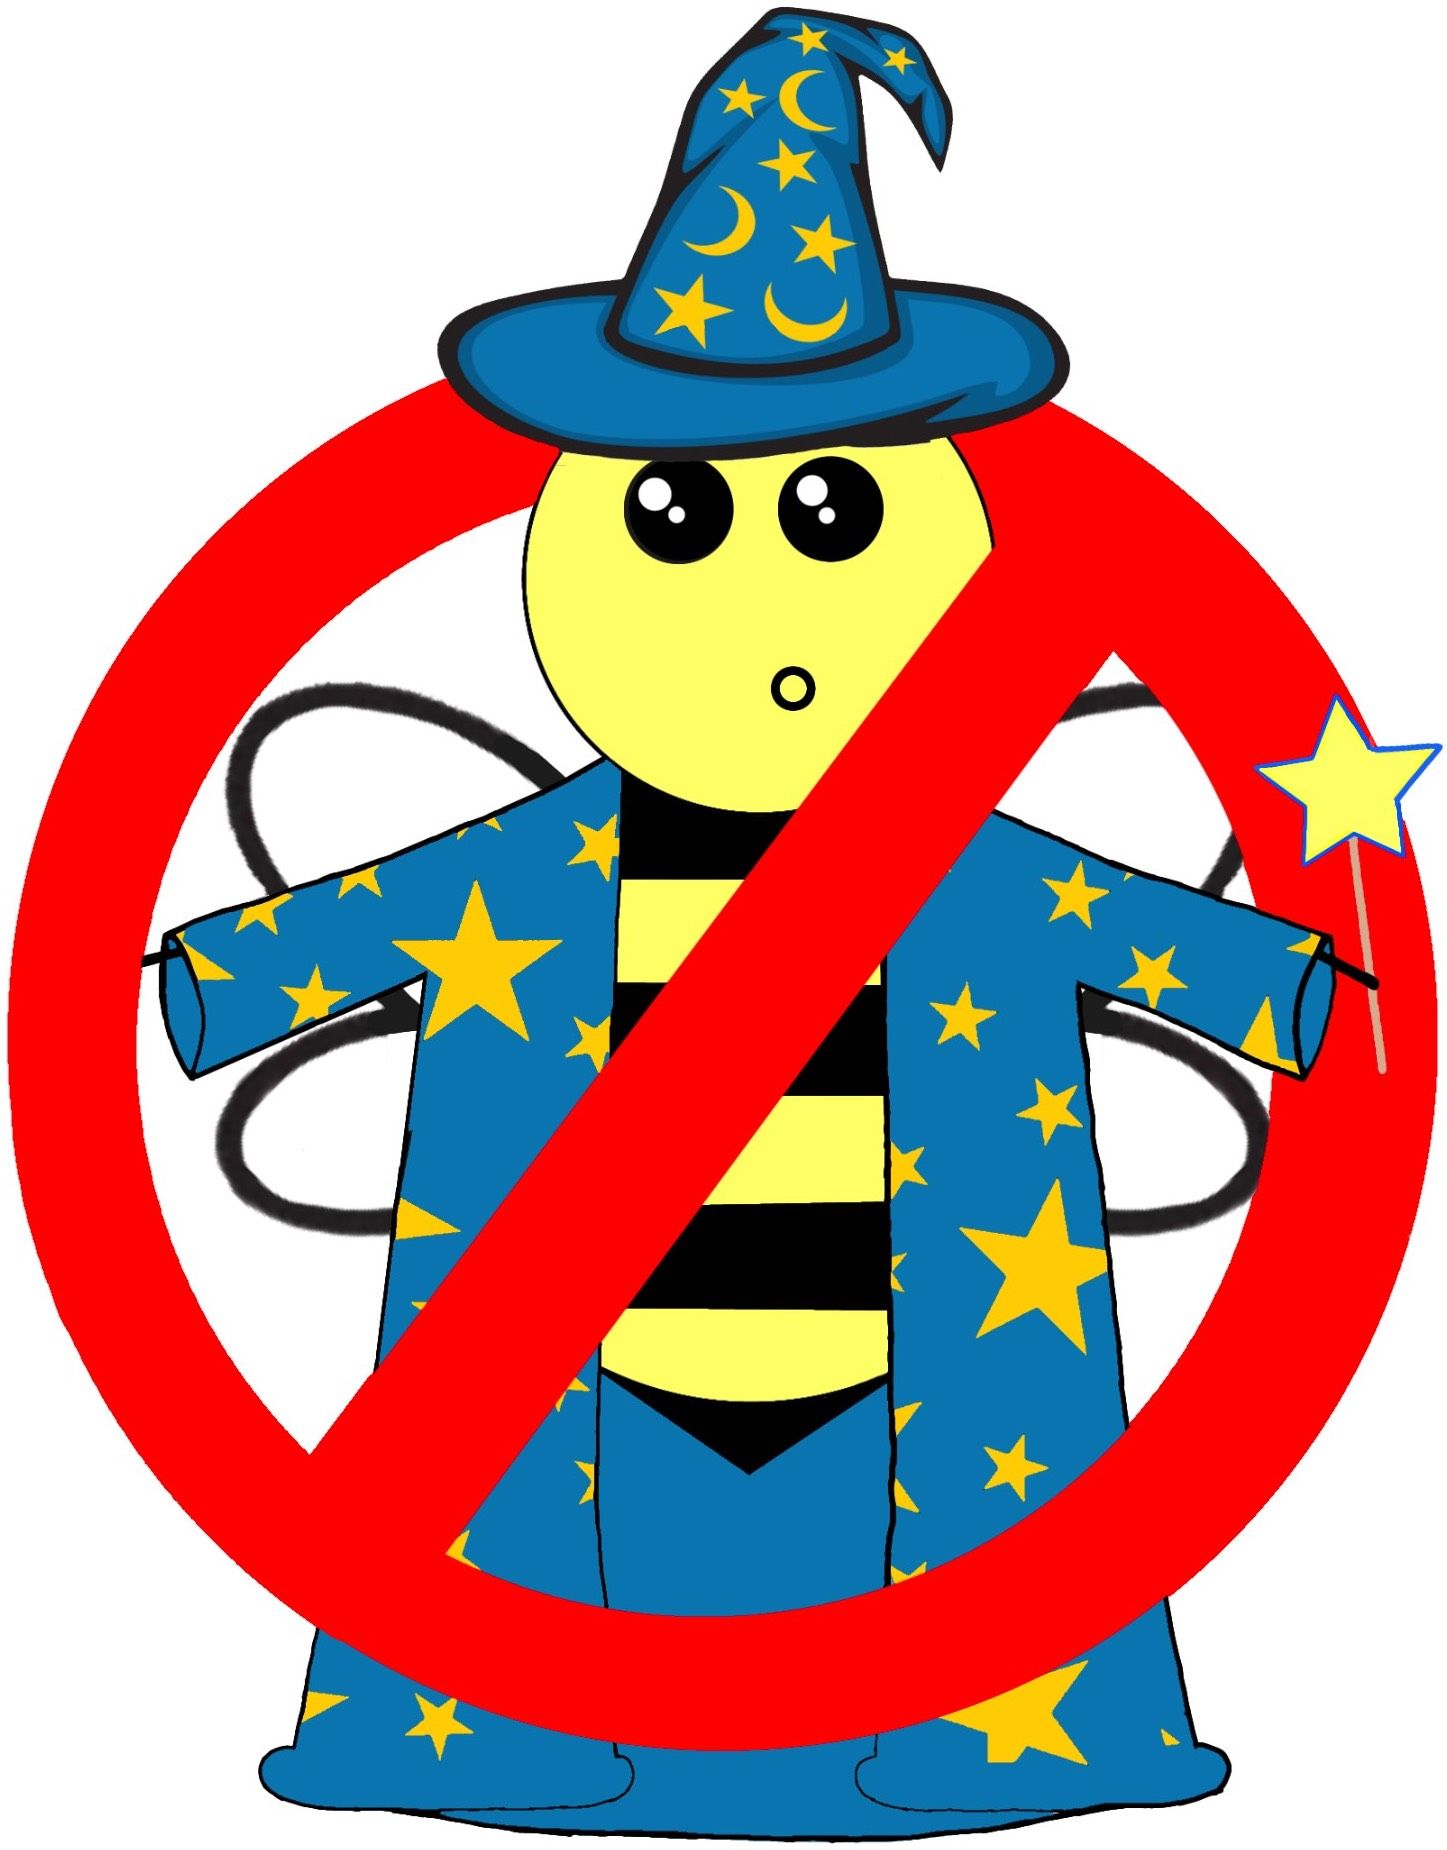 A bee wearing a wizard hat and magic wand